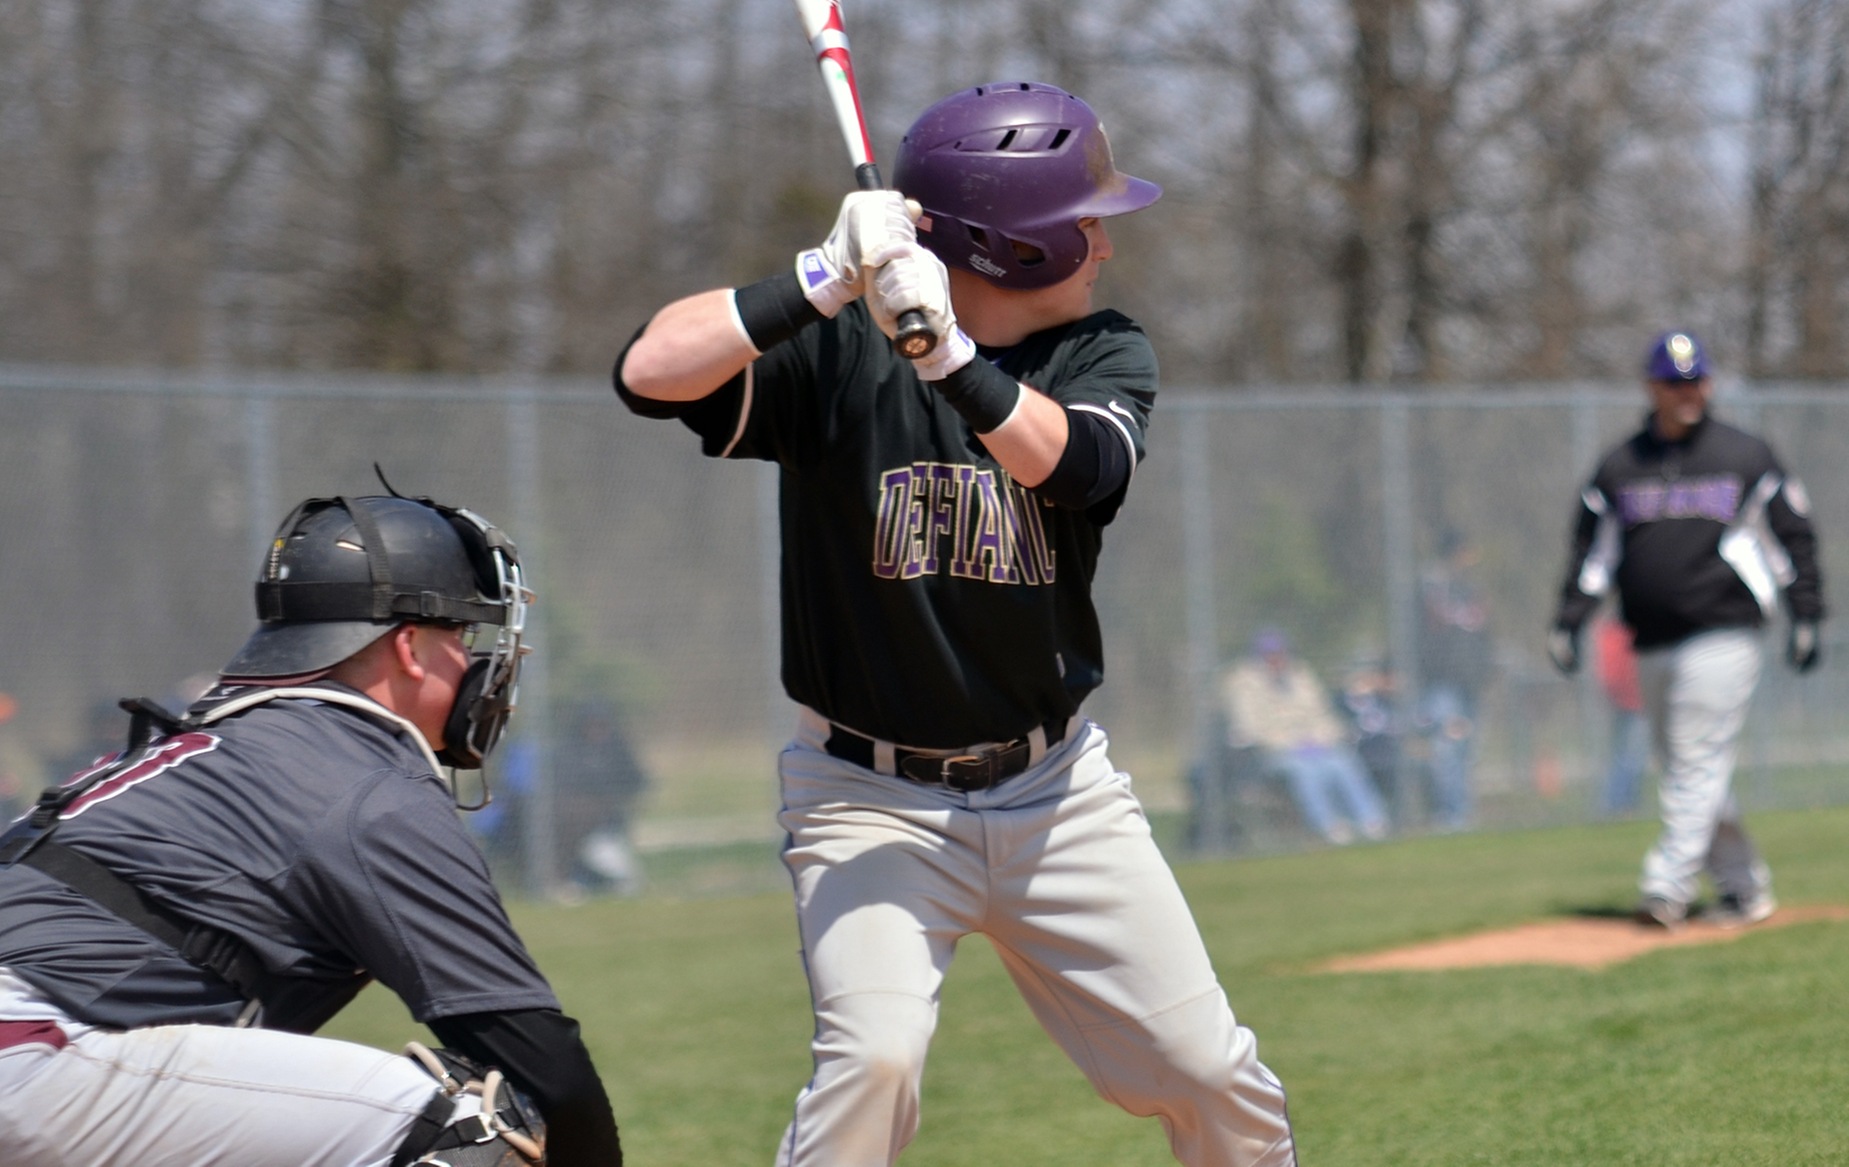 DC Loses Heartbreaker in Bottom of the Ninth at Rose-Hulman